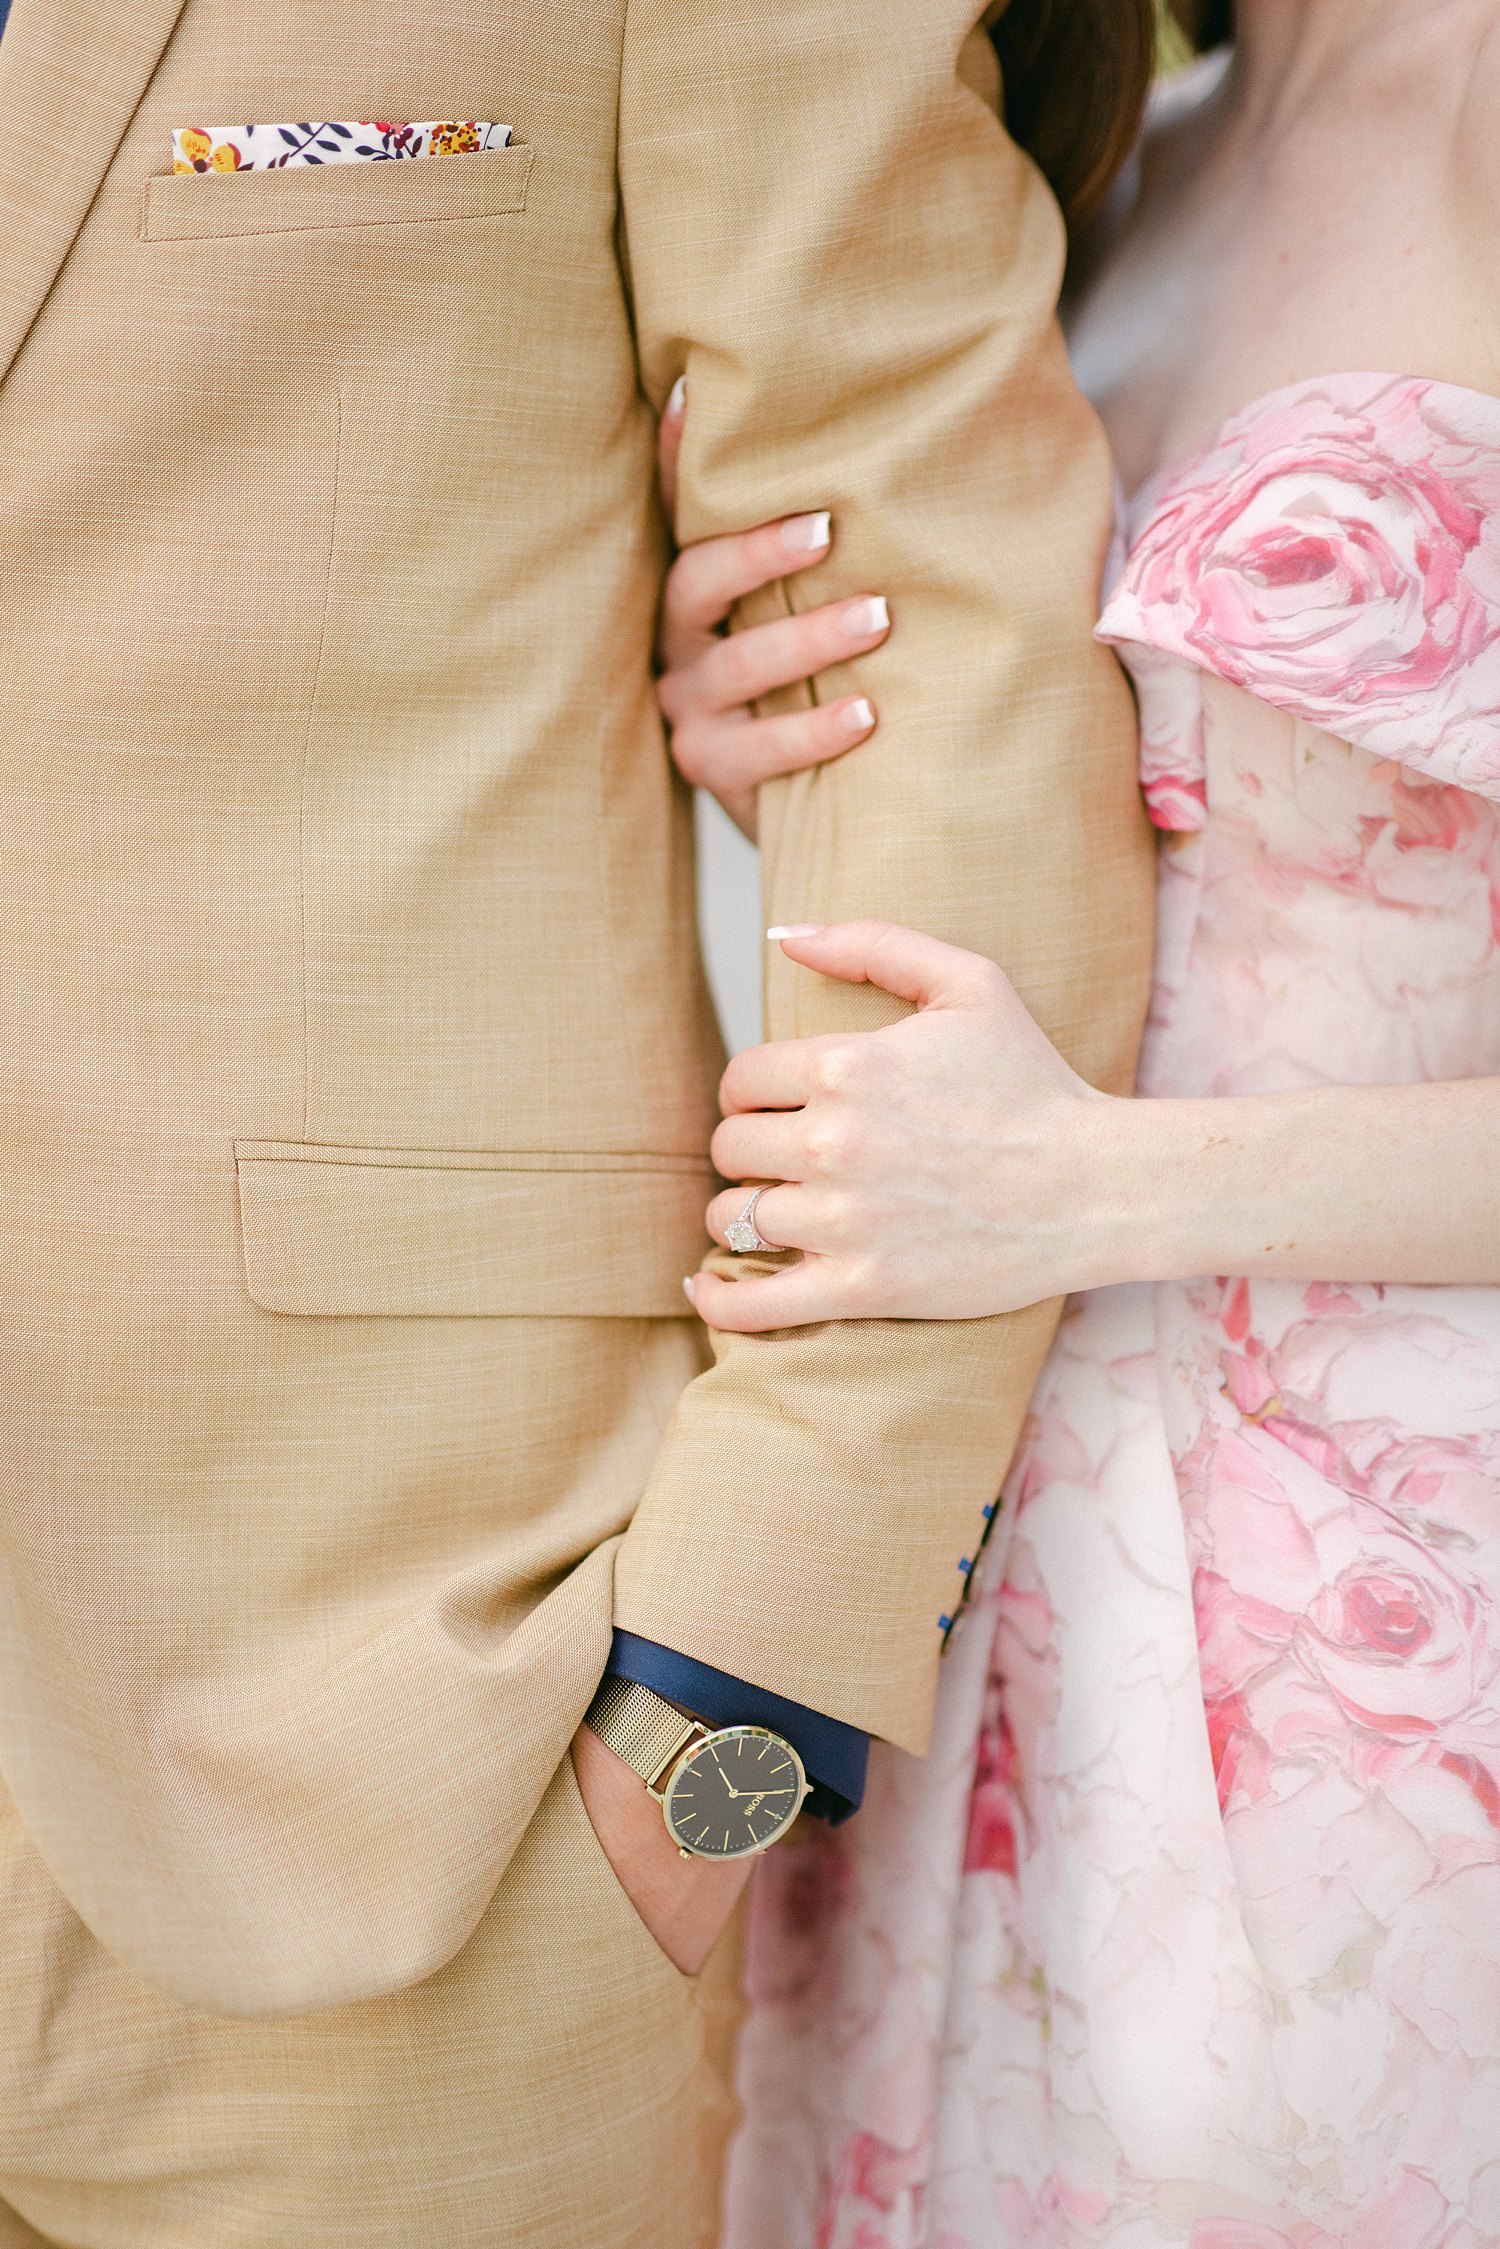 Woman in Pink floral gown hand and arm around man in tan suite